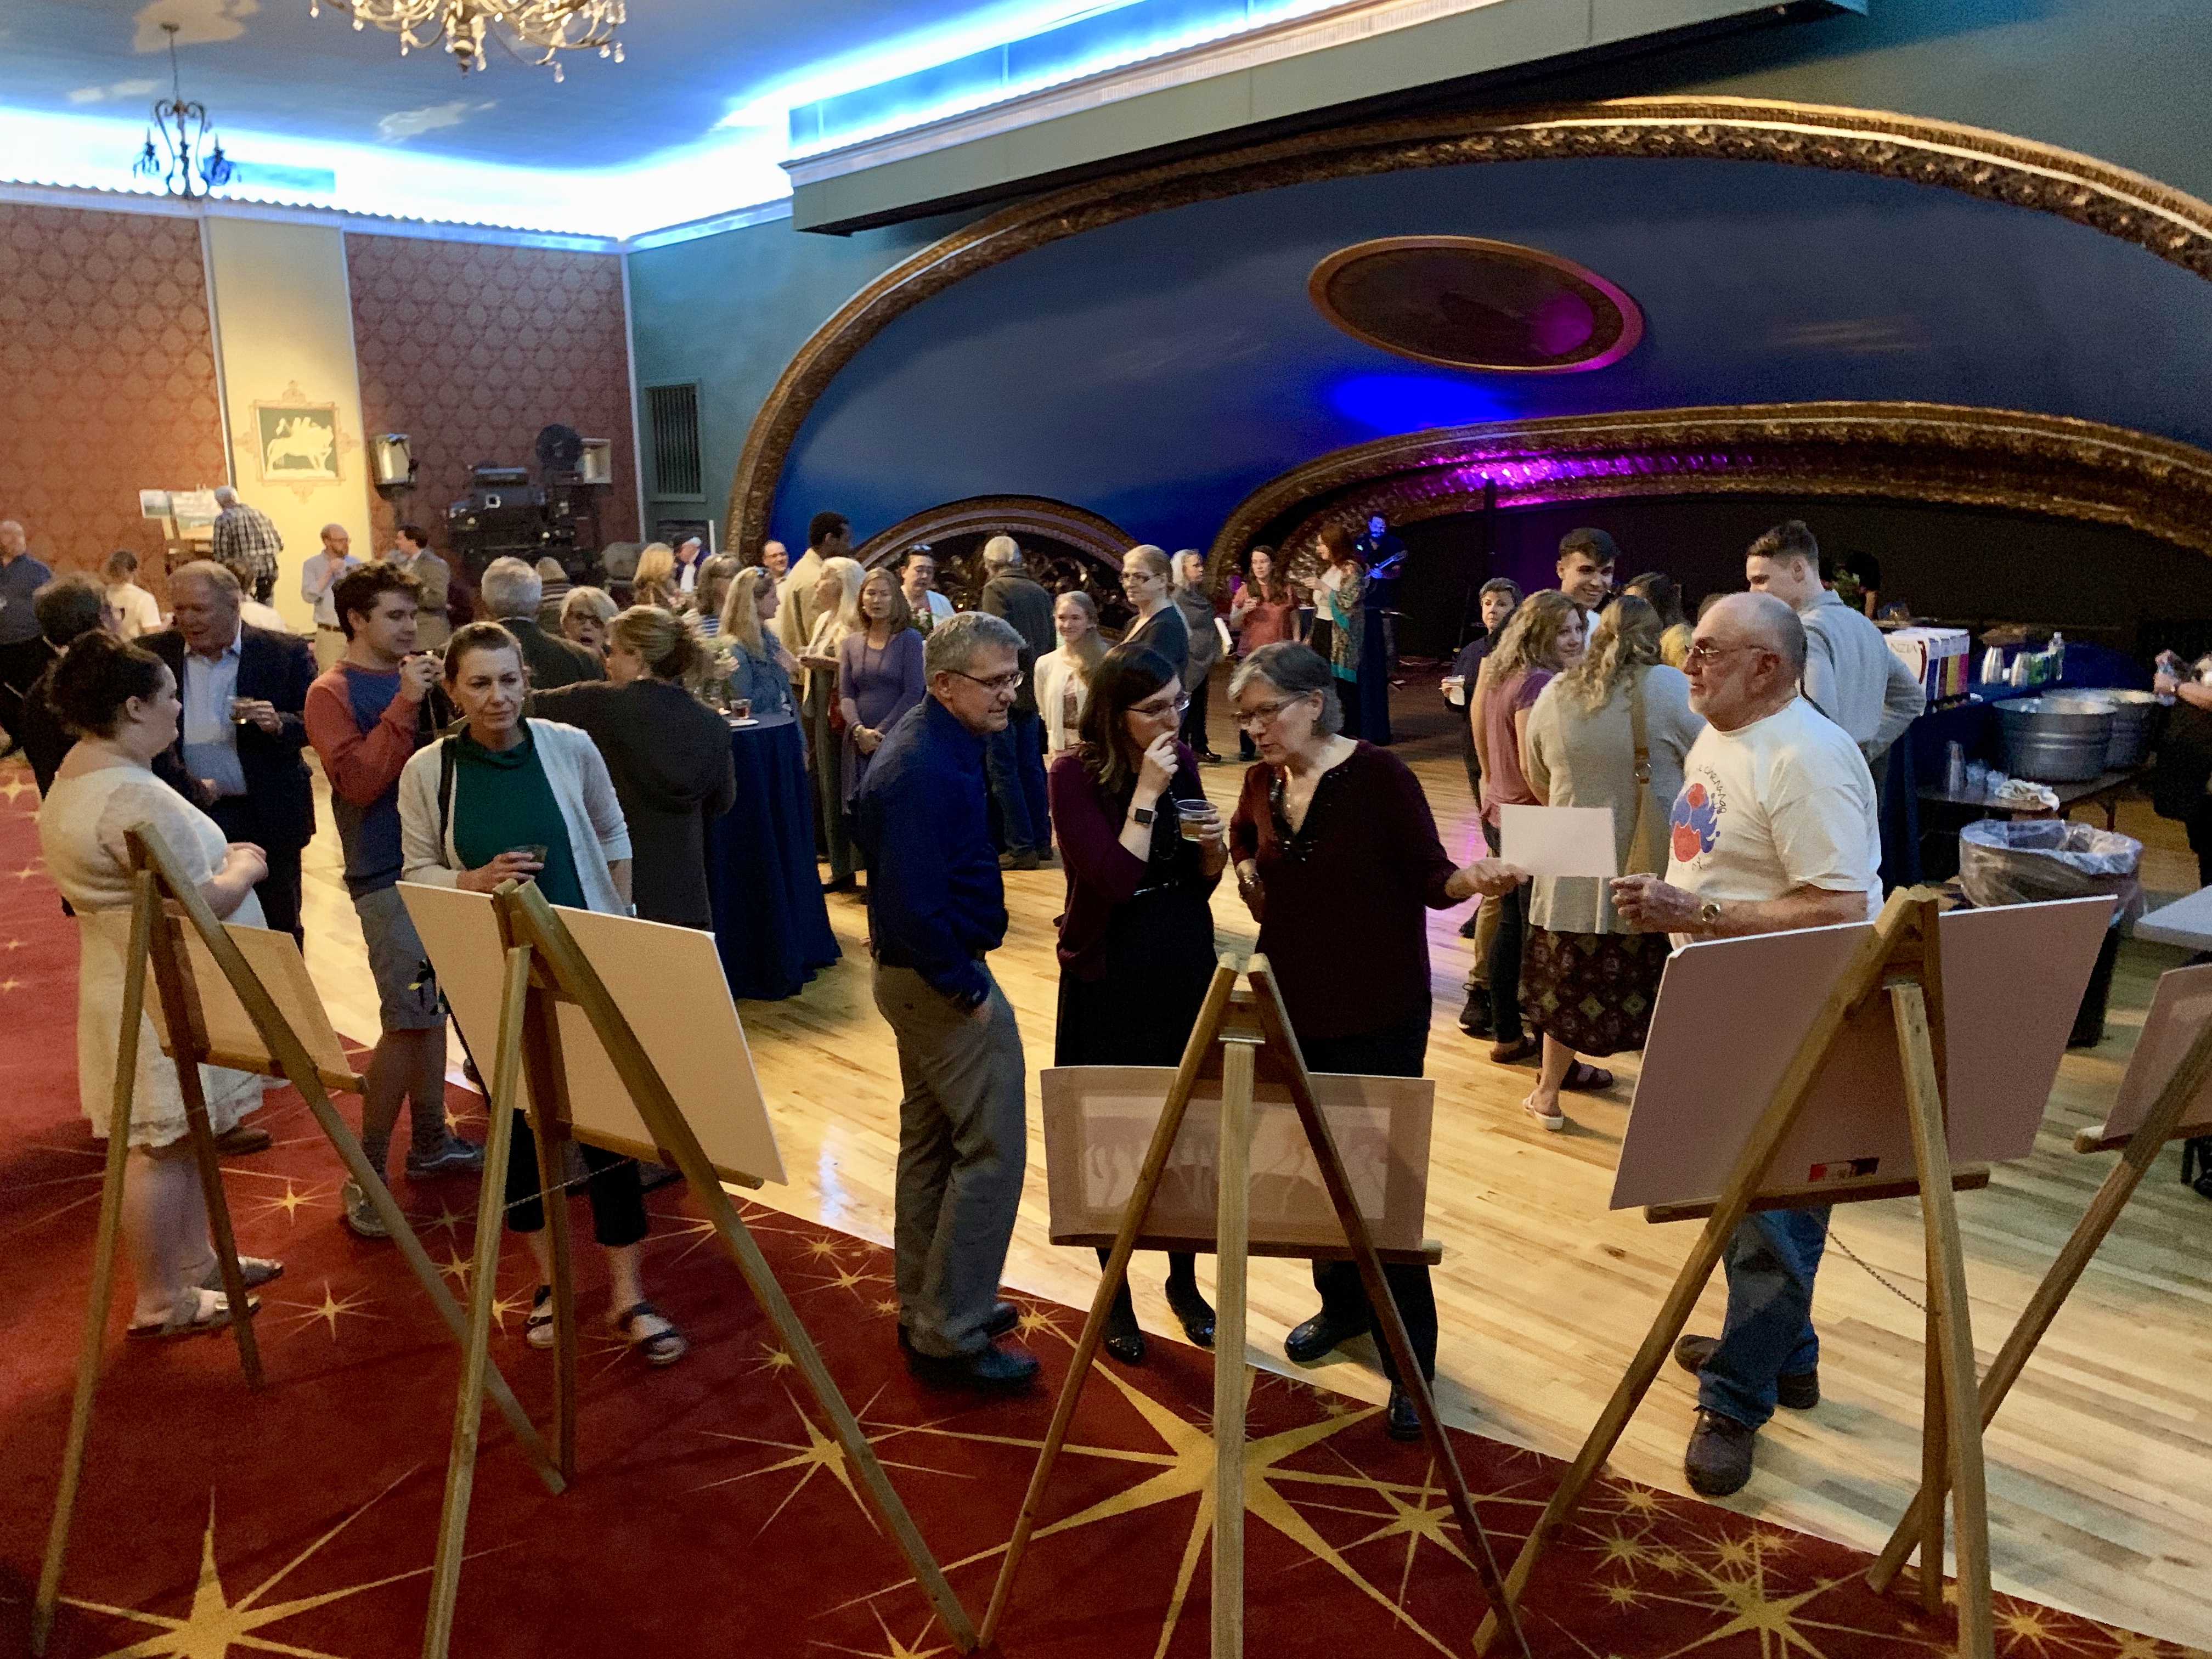 people stand in front of easels with canvas on them and around a large room with curved blue ceiling